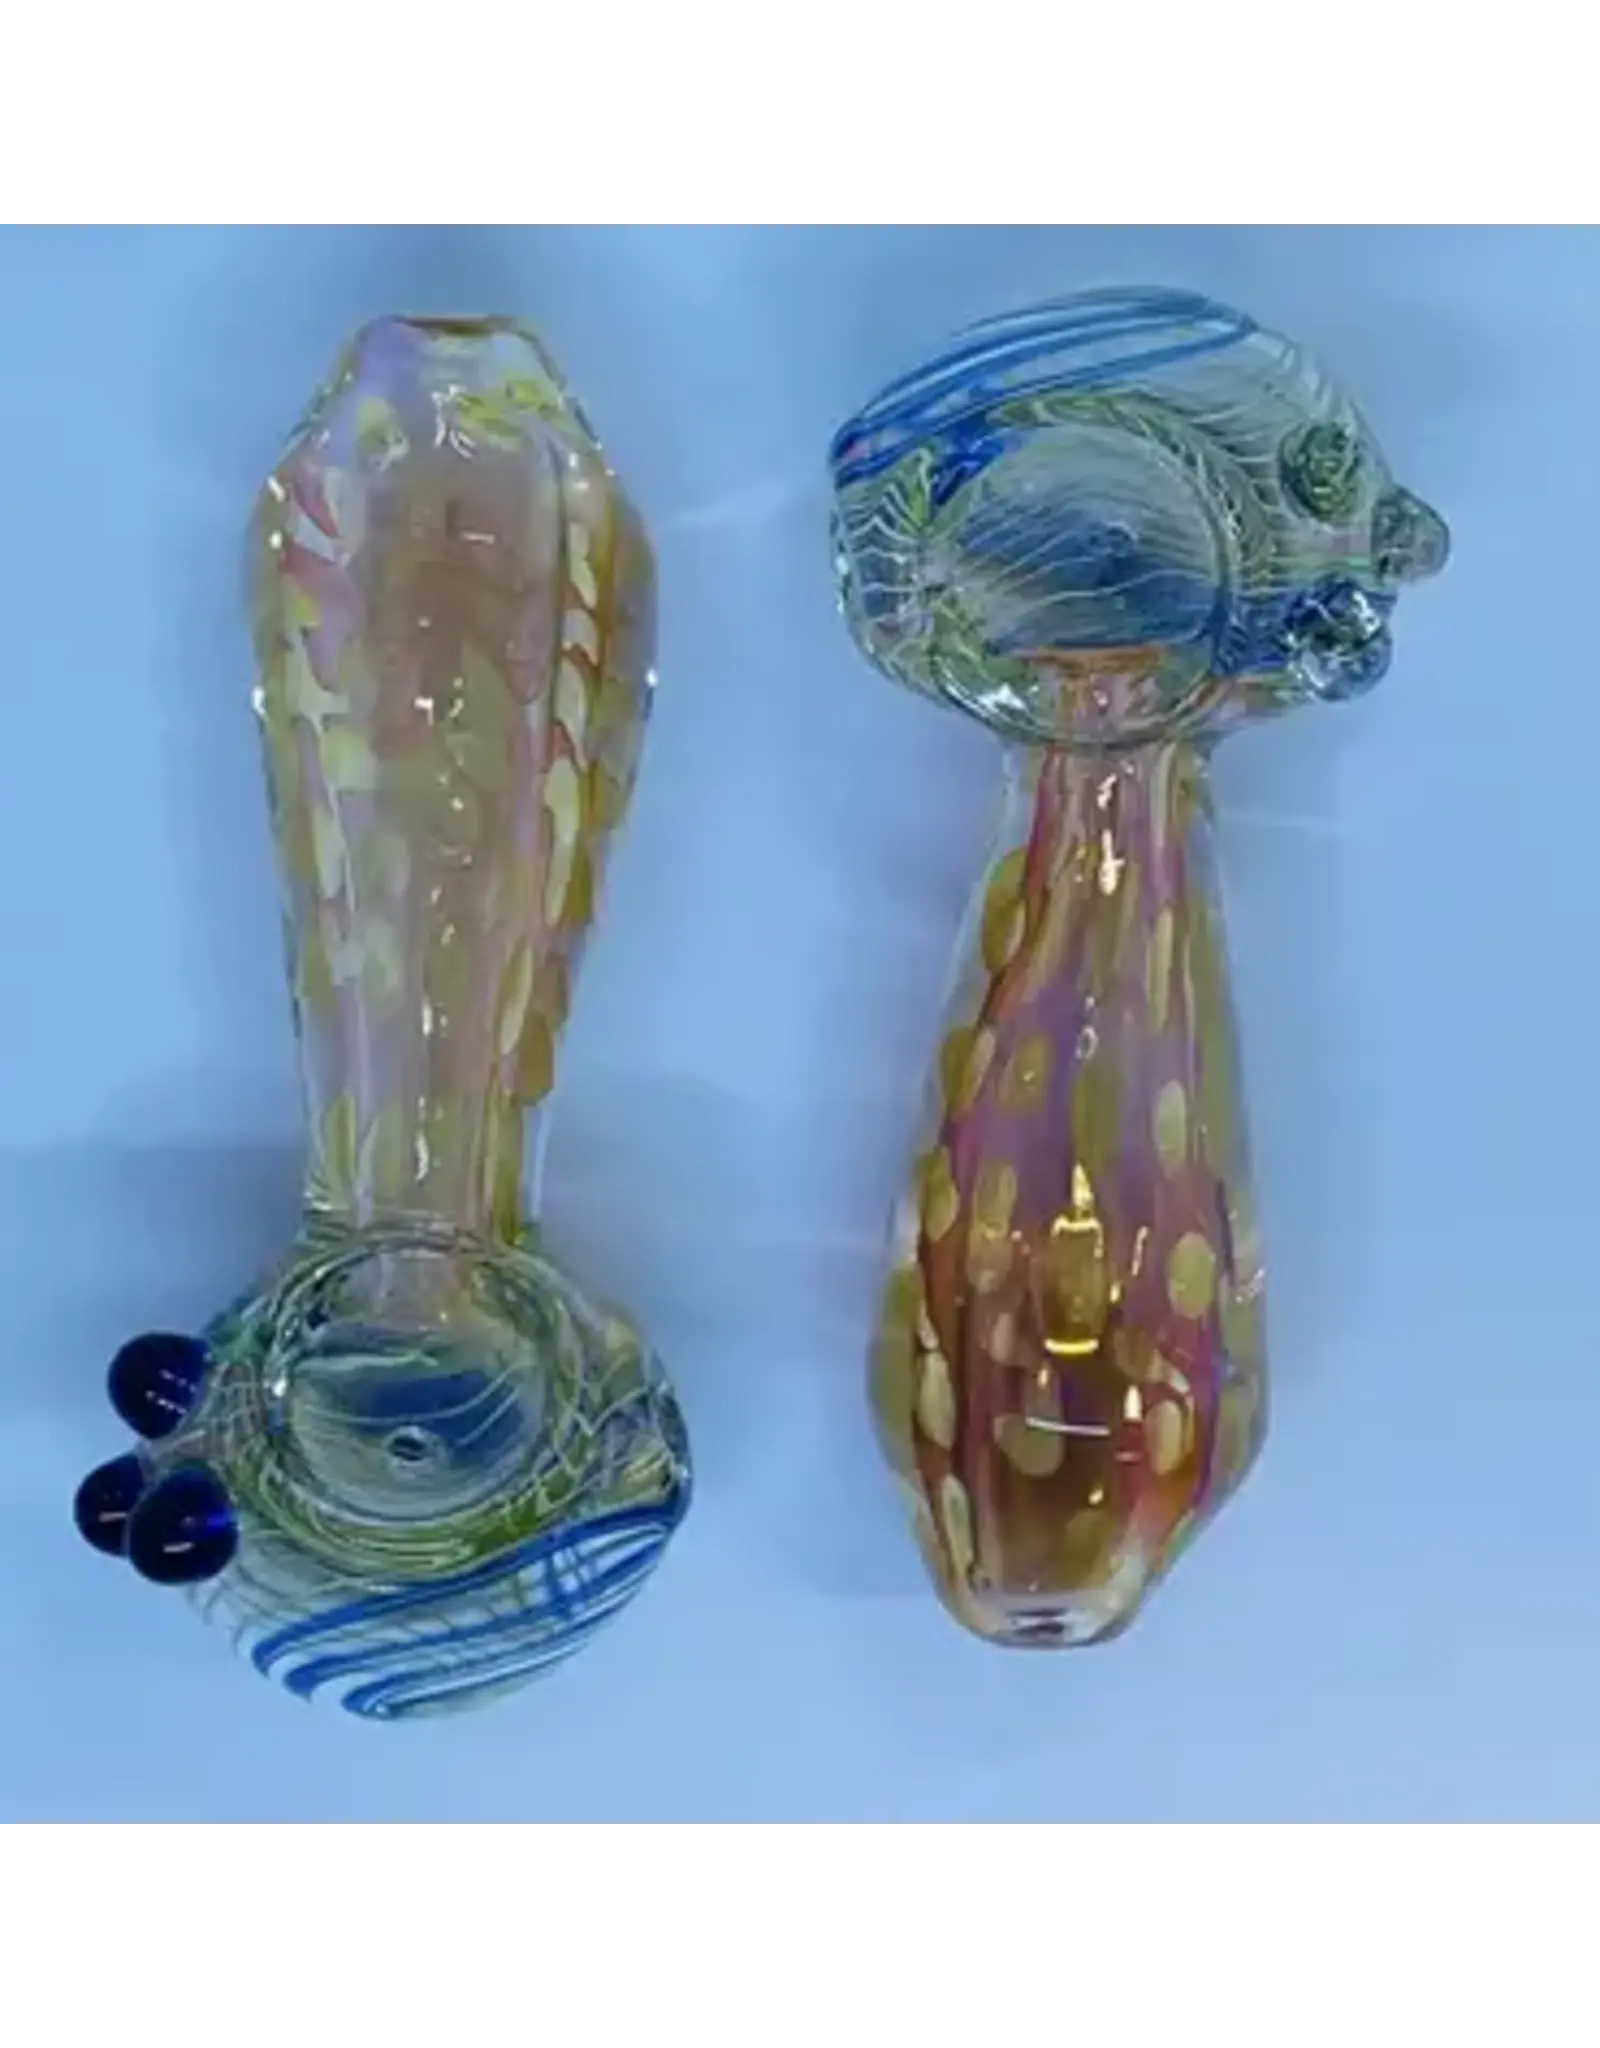 Smokerz Glass SMKZ        4.5" Heavy Spiral and Marble Head Gold Fume Dots         R137